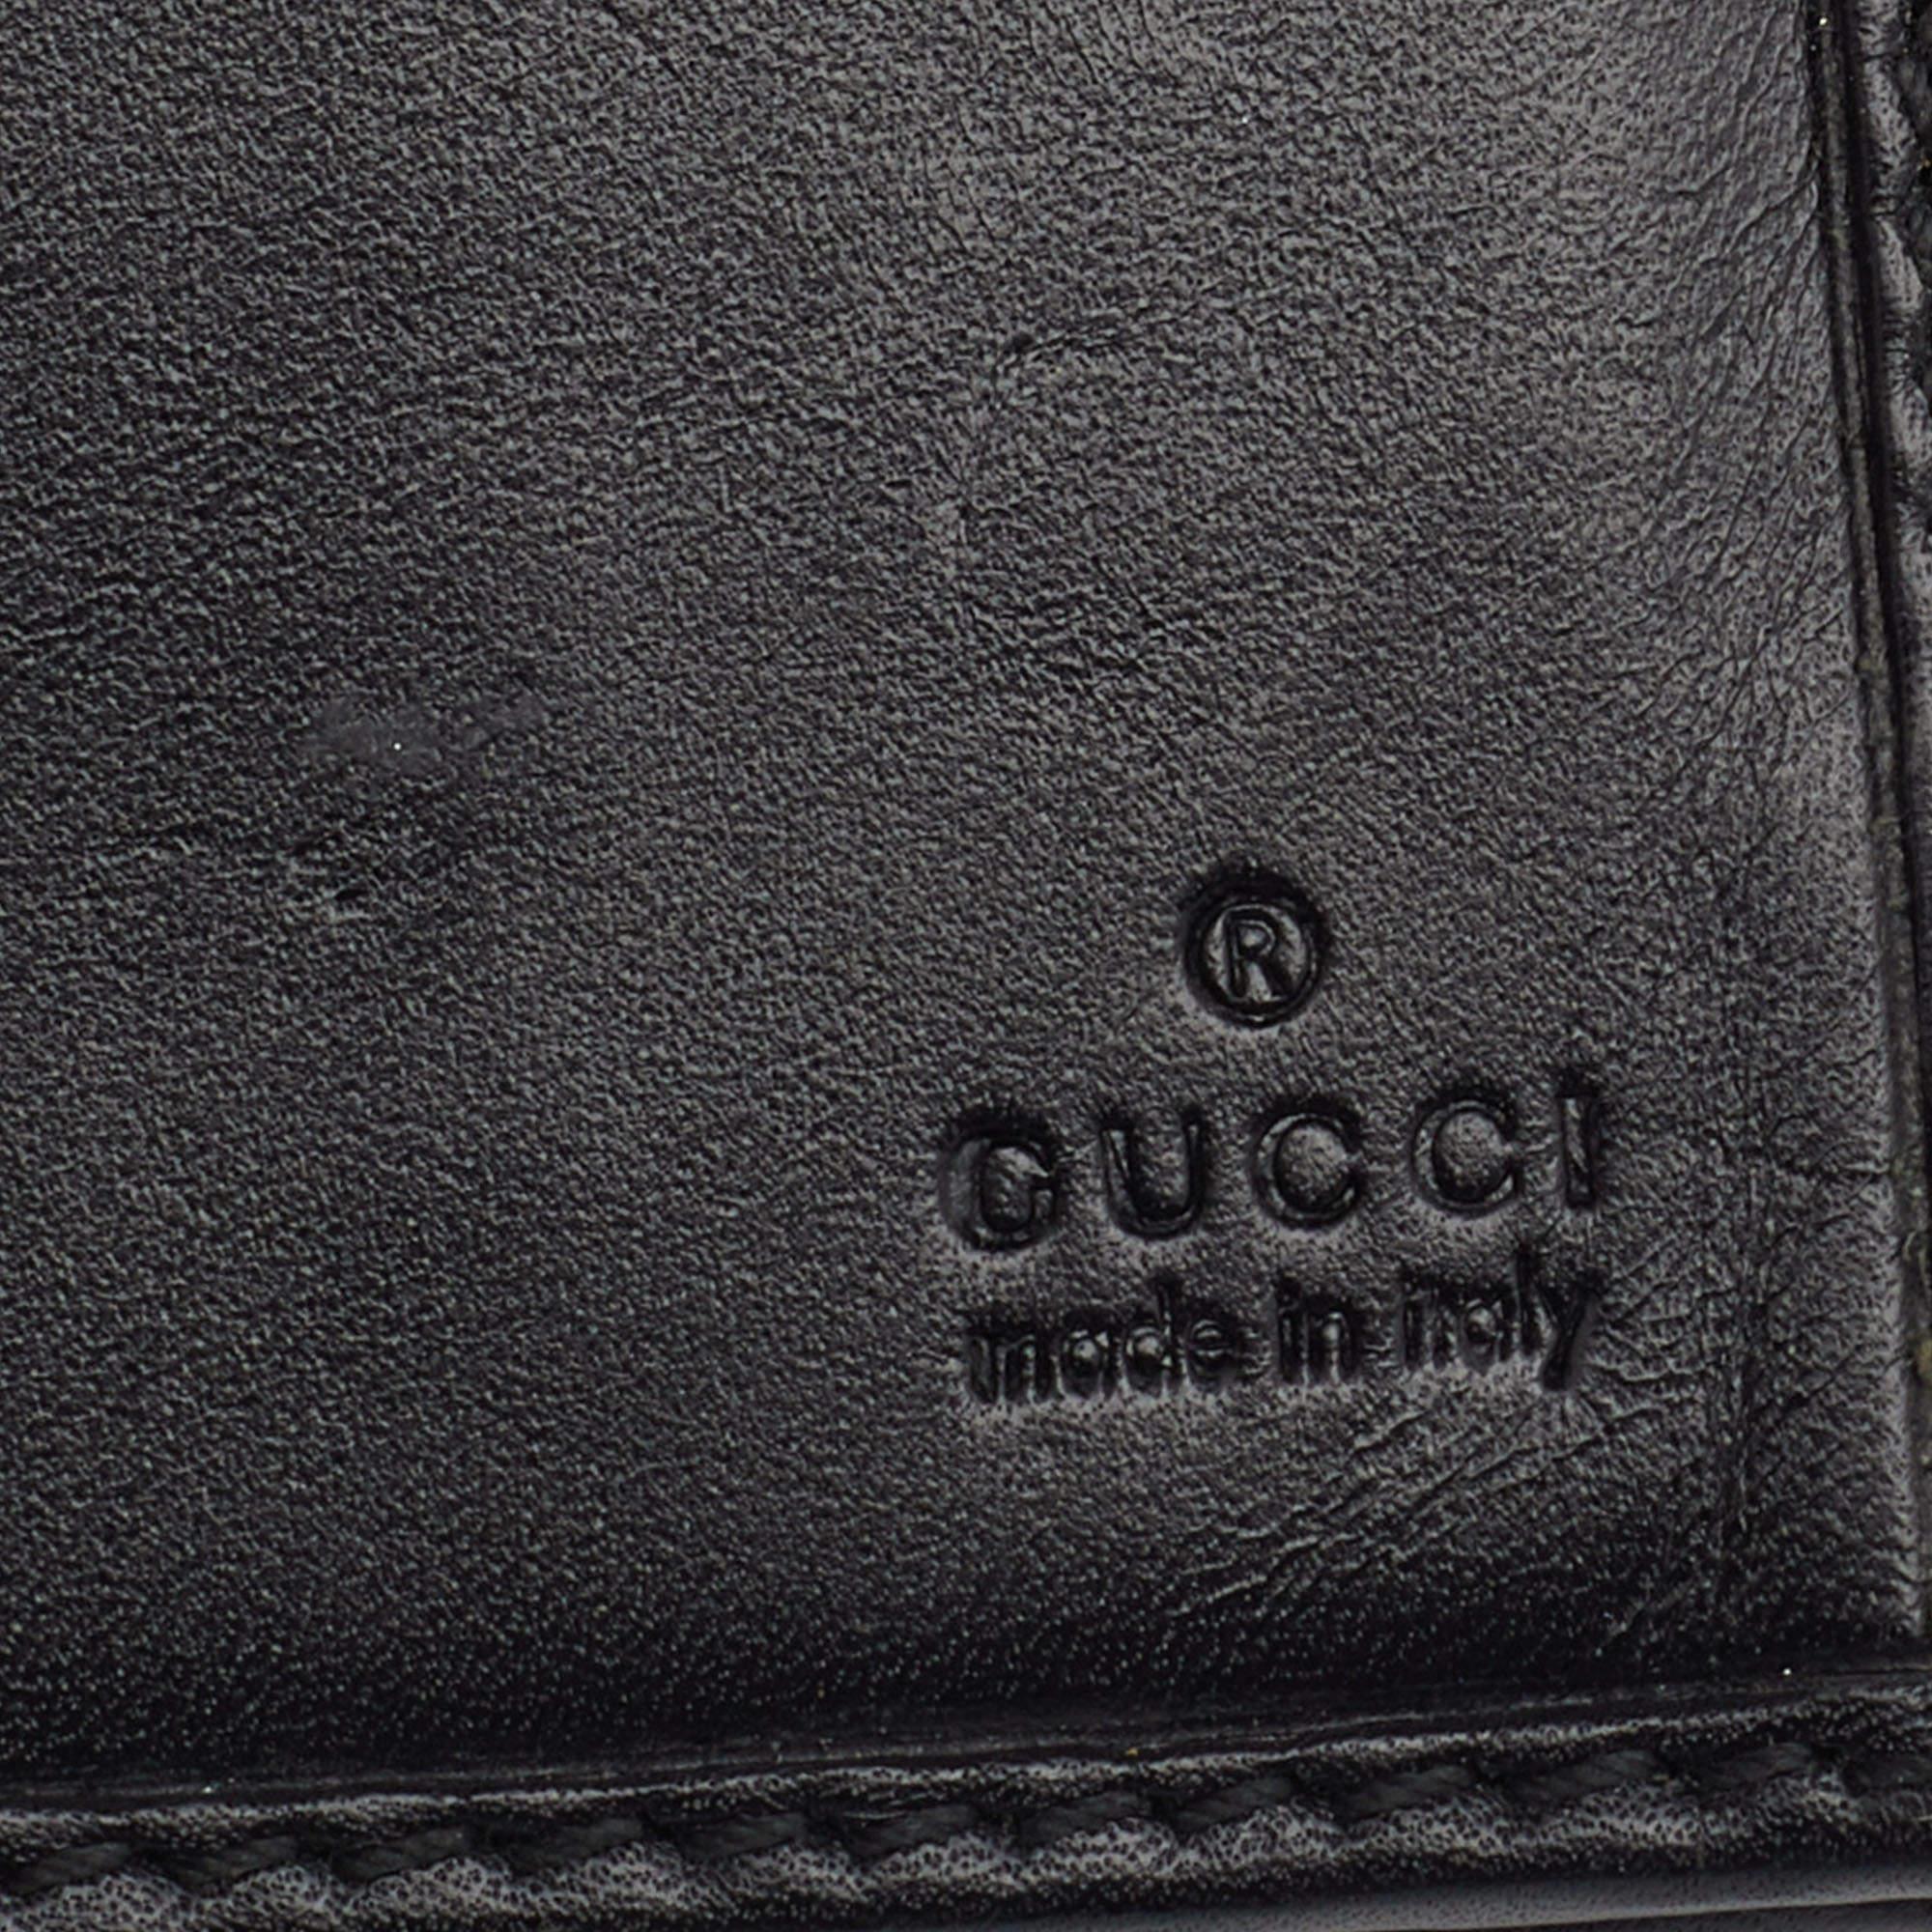 Gucci Black Guccissima Leather Bifold Flap Long Wallet 1